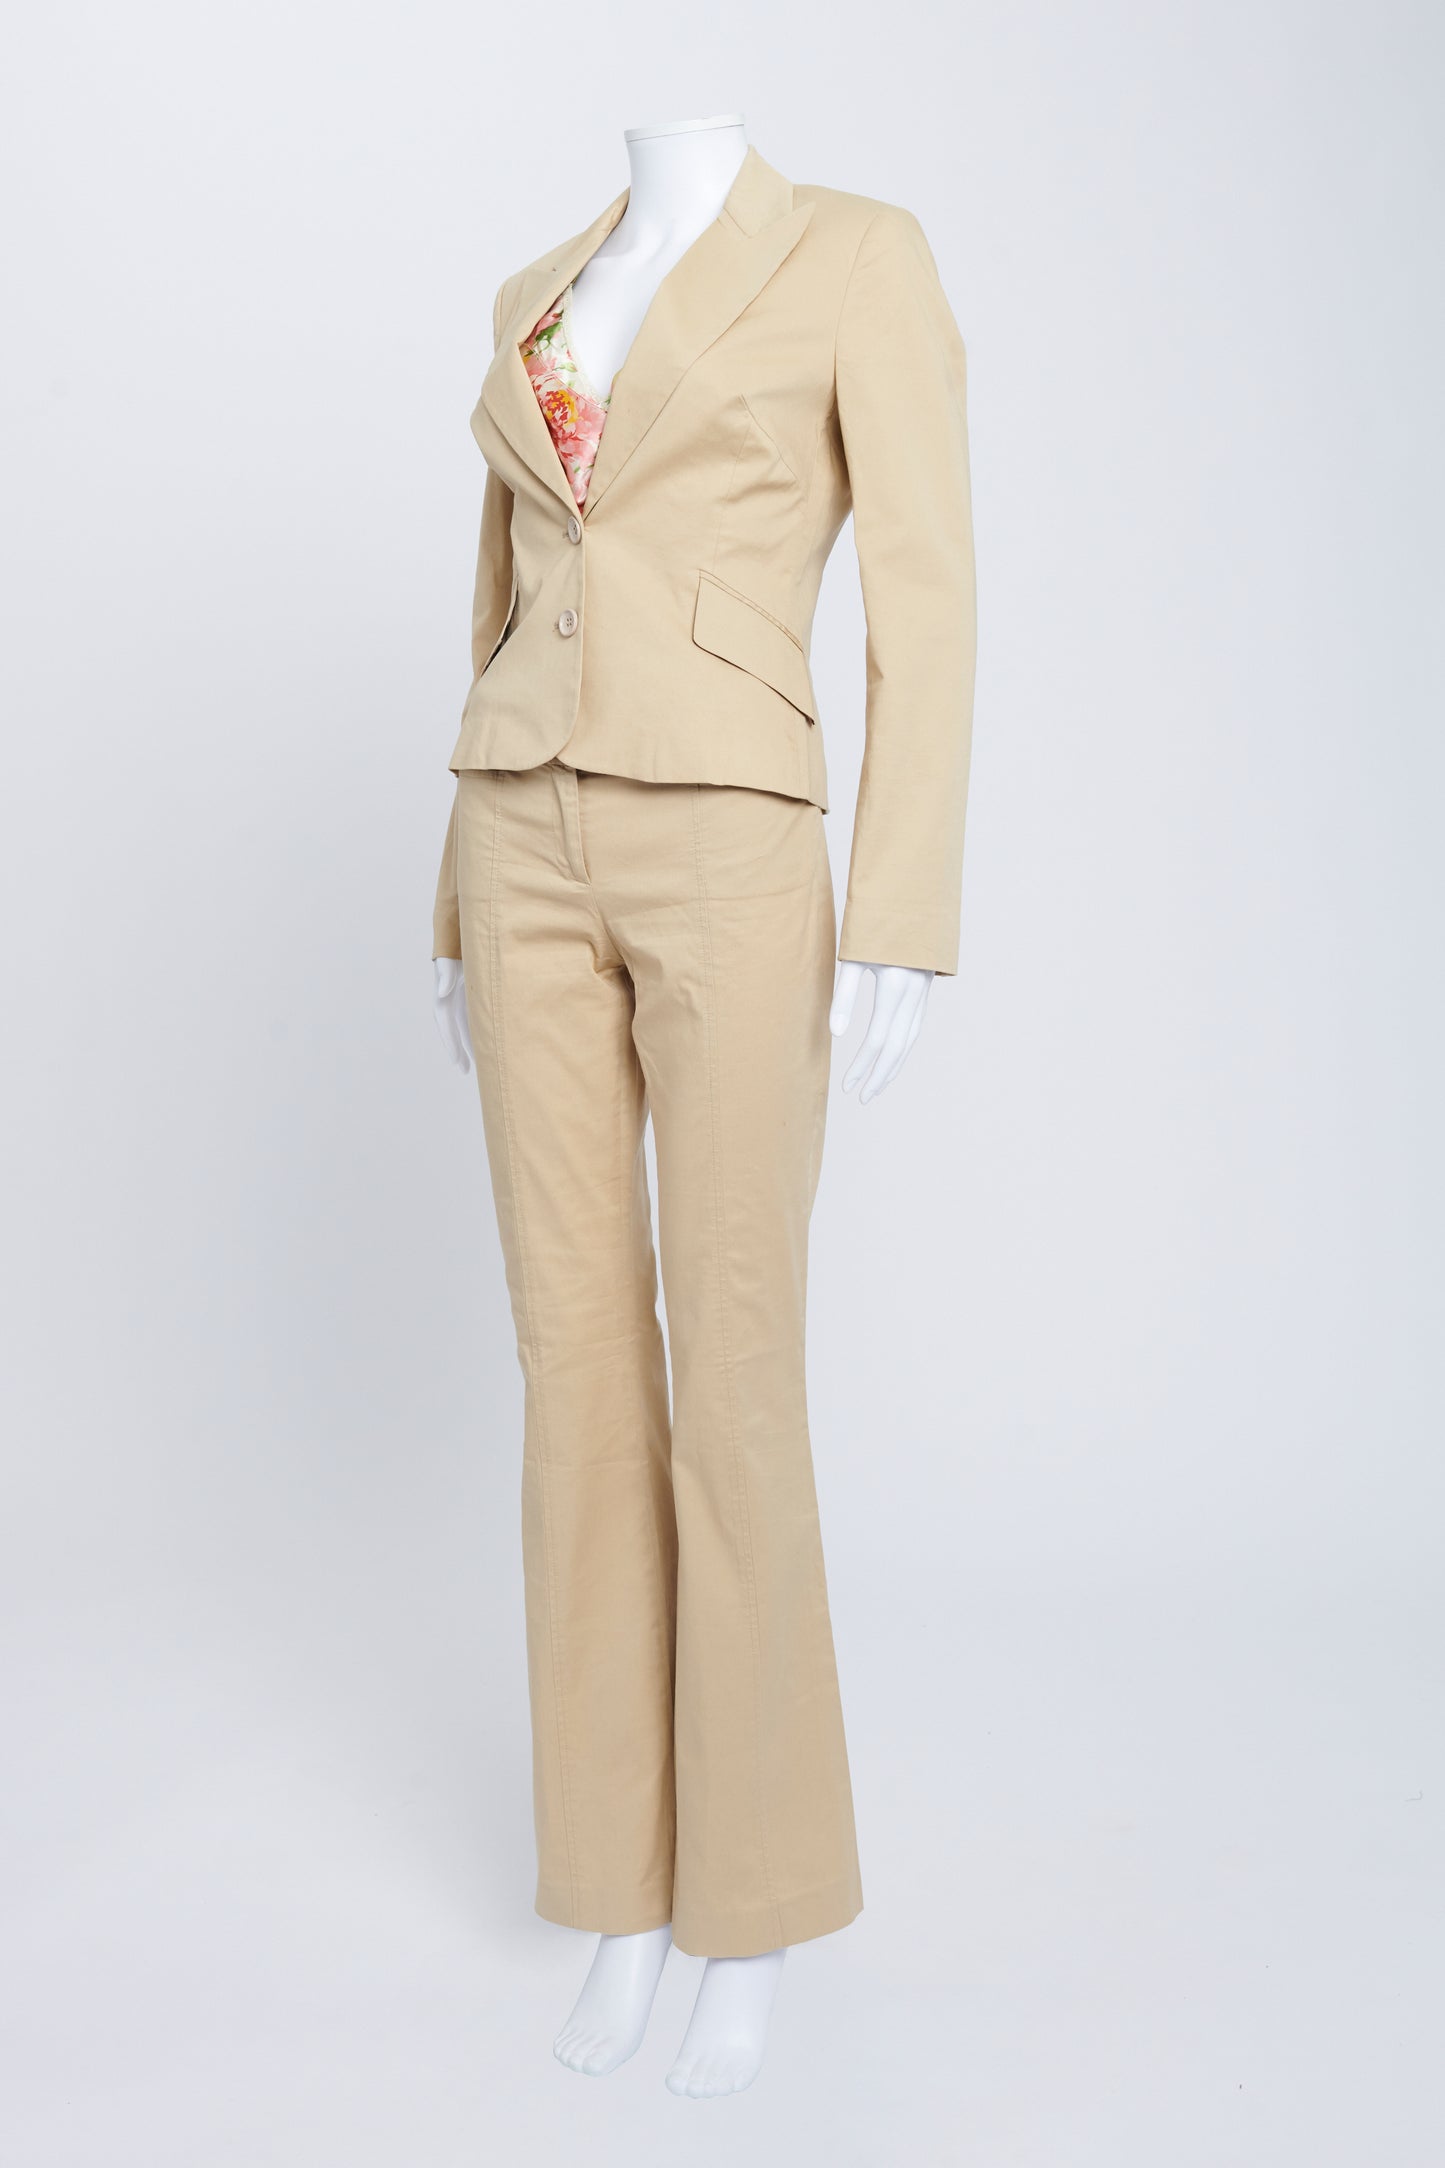 Vintage Camel Cotton Suit With Cropped Blazer